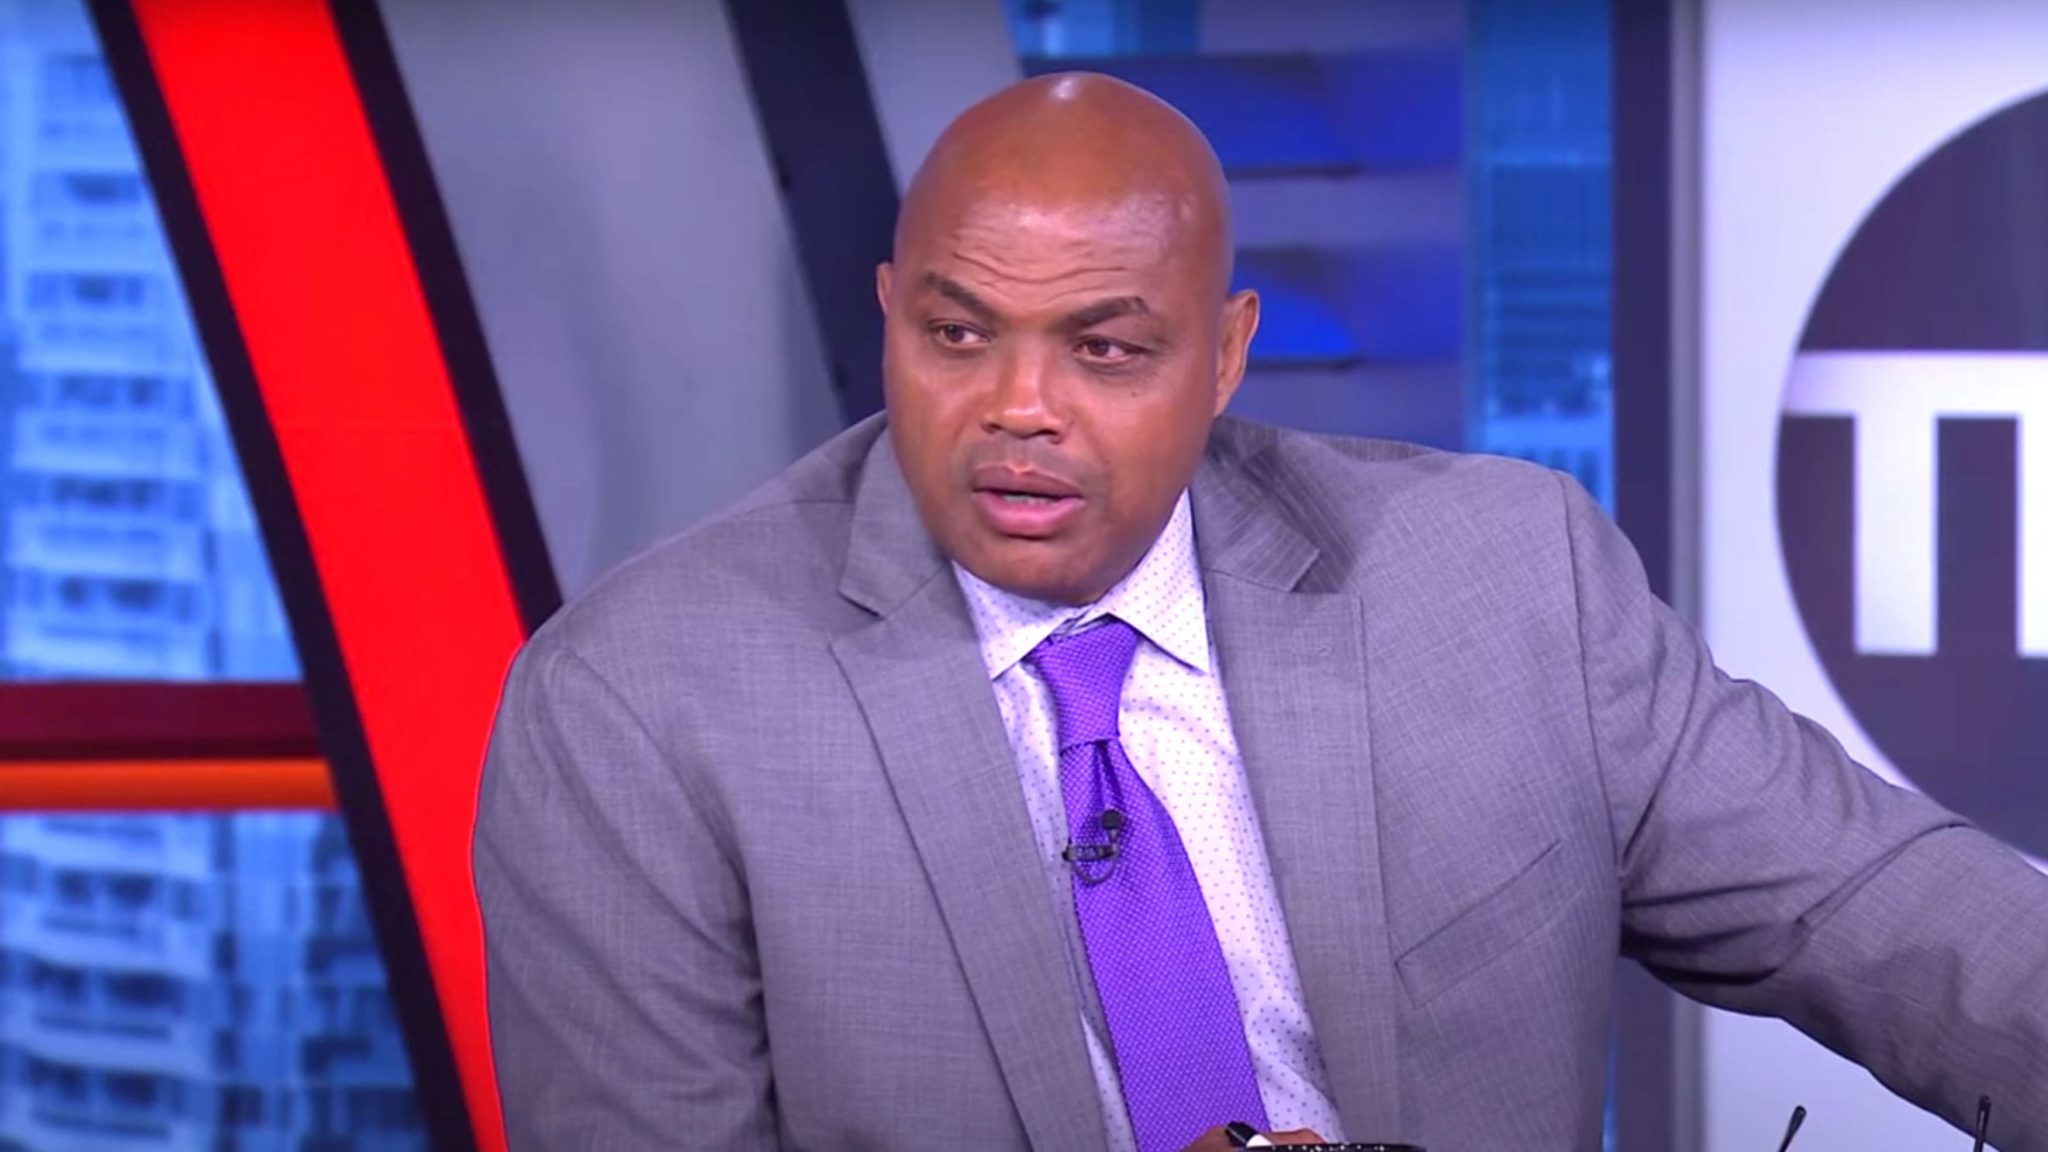 Charles Barkley Calls Lakers ‘Geezers,’ and AD Needs To Play Better